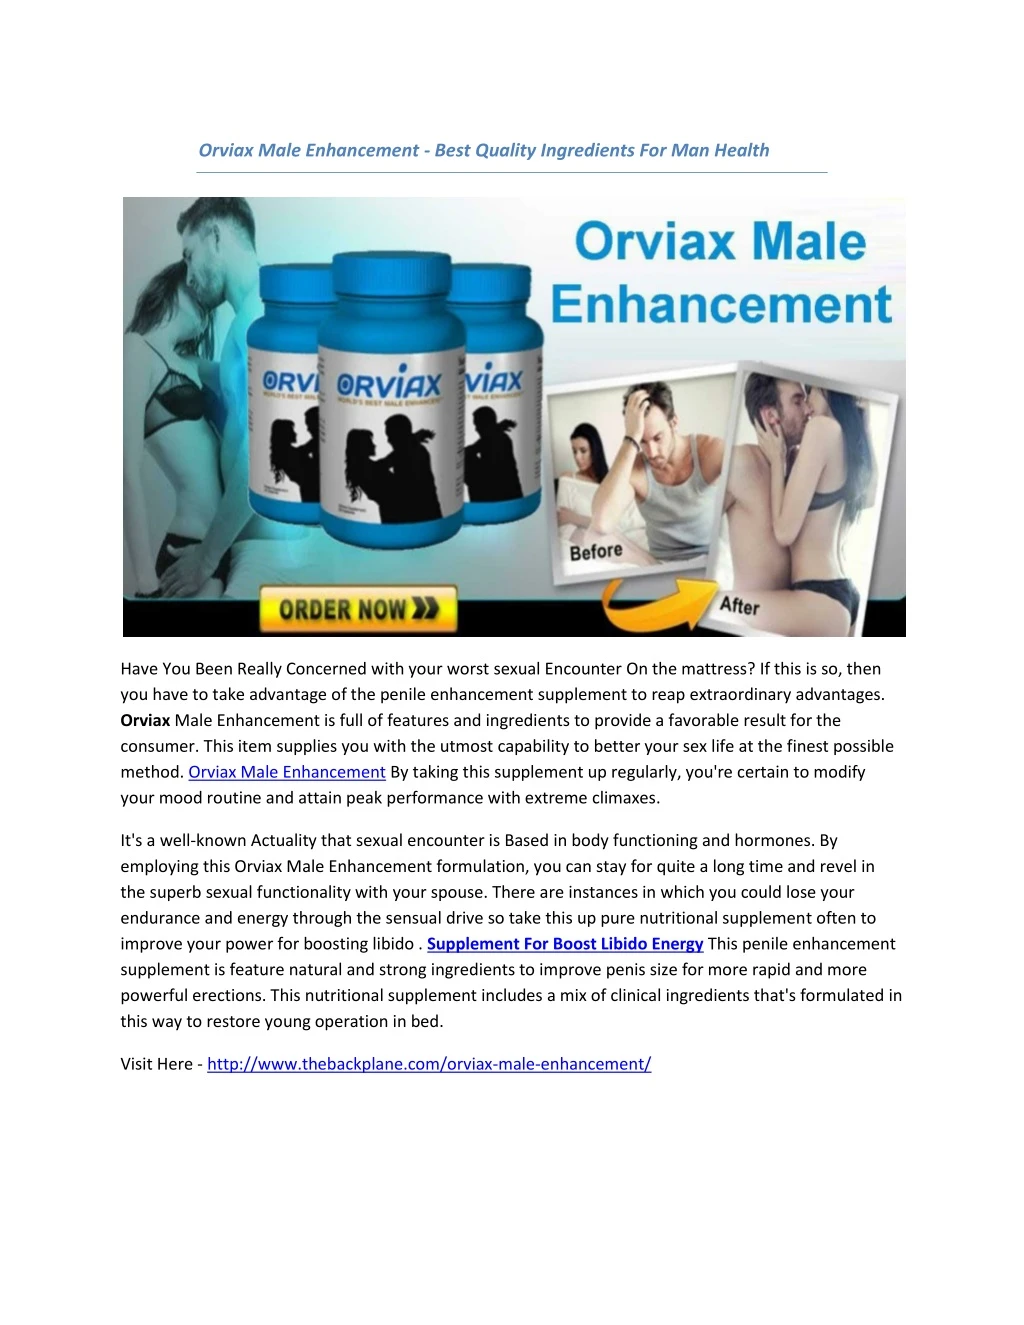 orviax male enhancement best quality ingredients